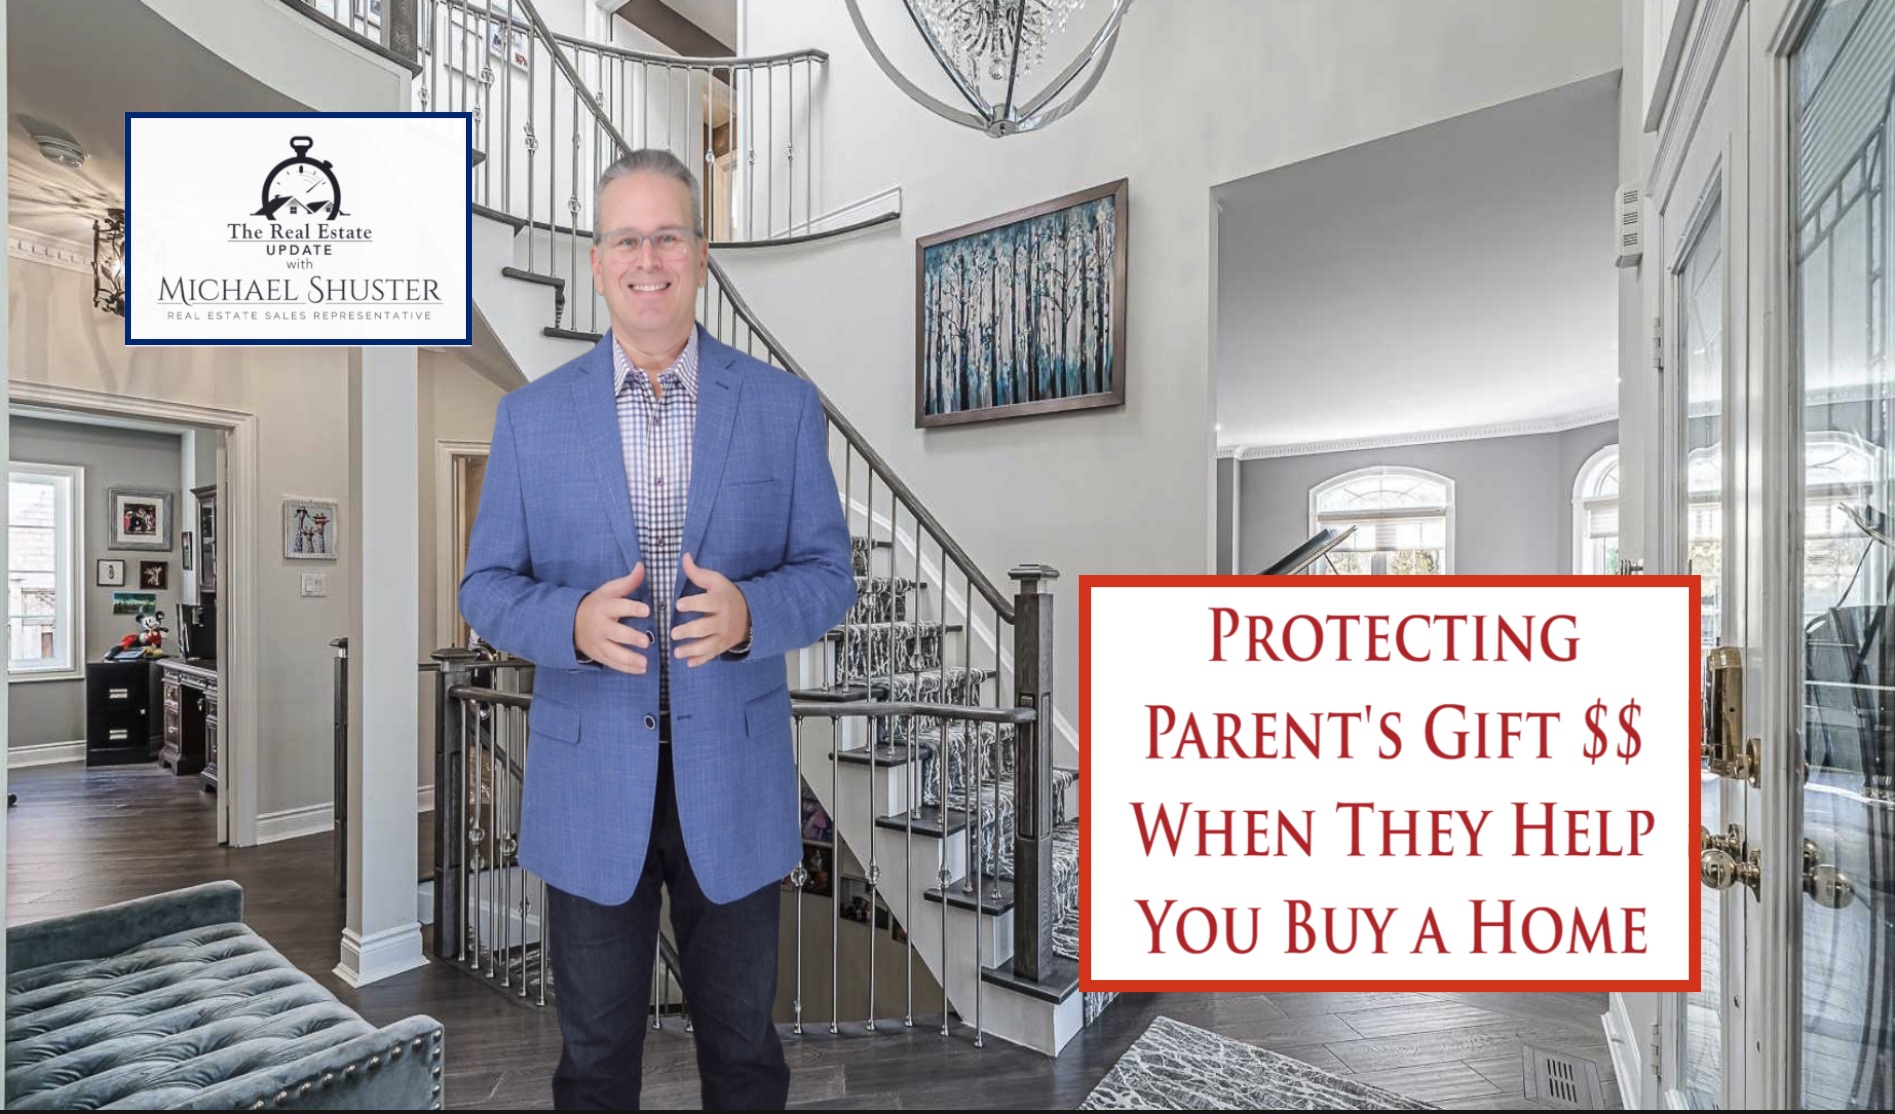 Protecting Parent’s Gift Money When They Help You Buy a Home